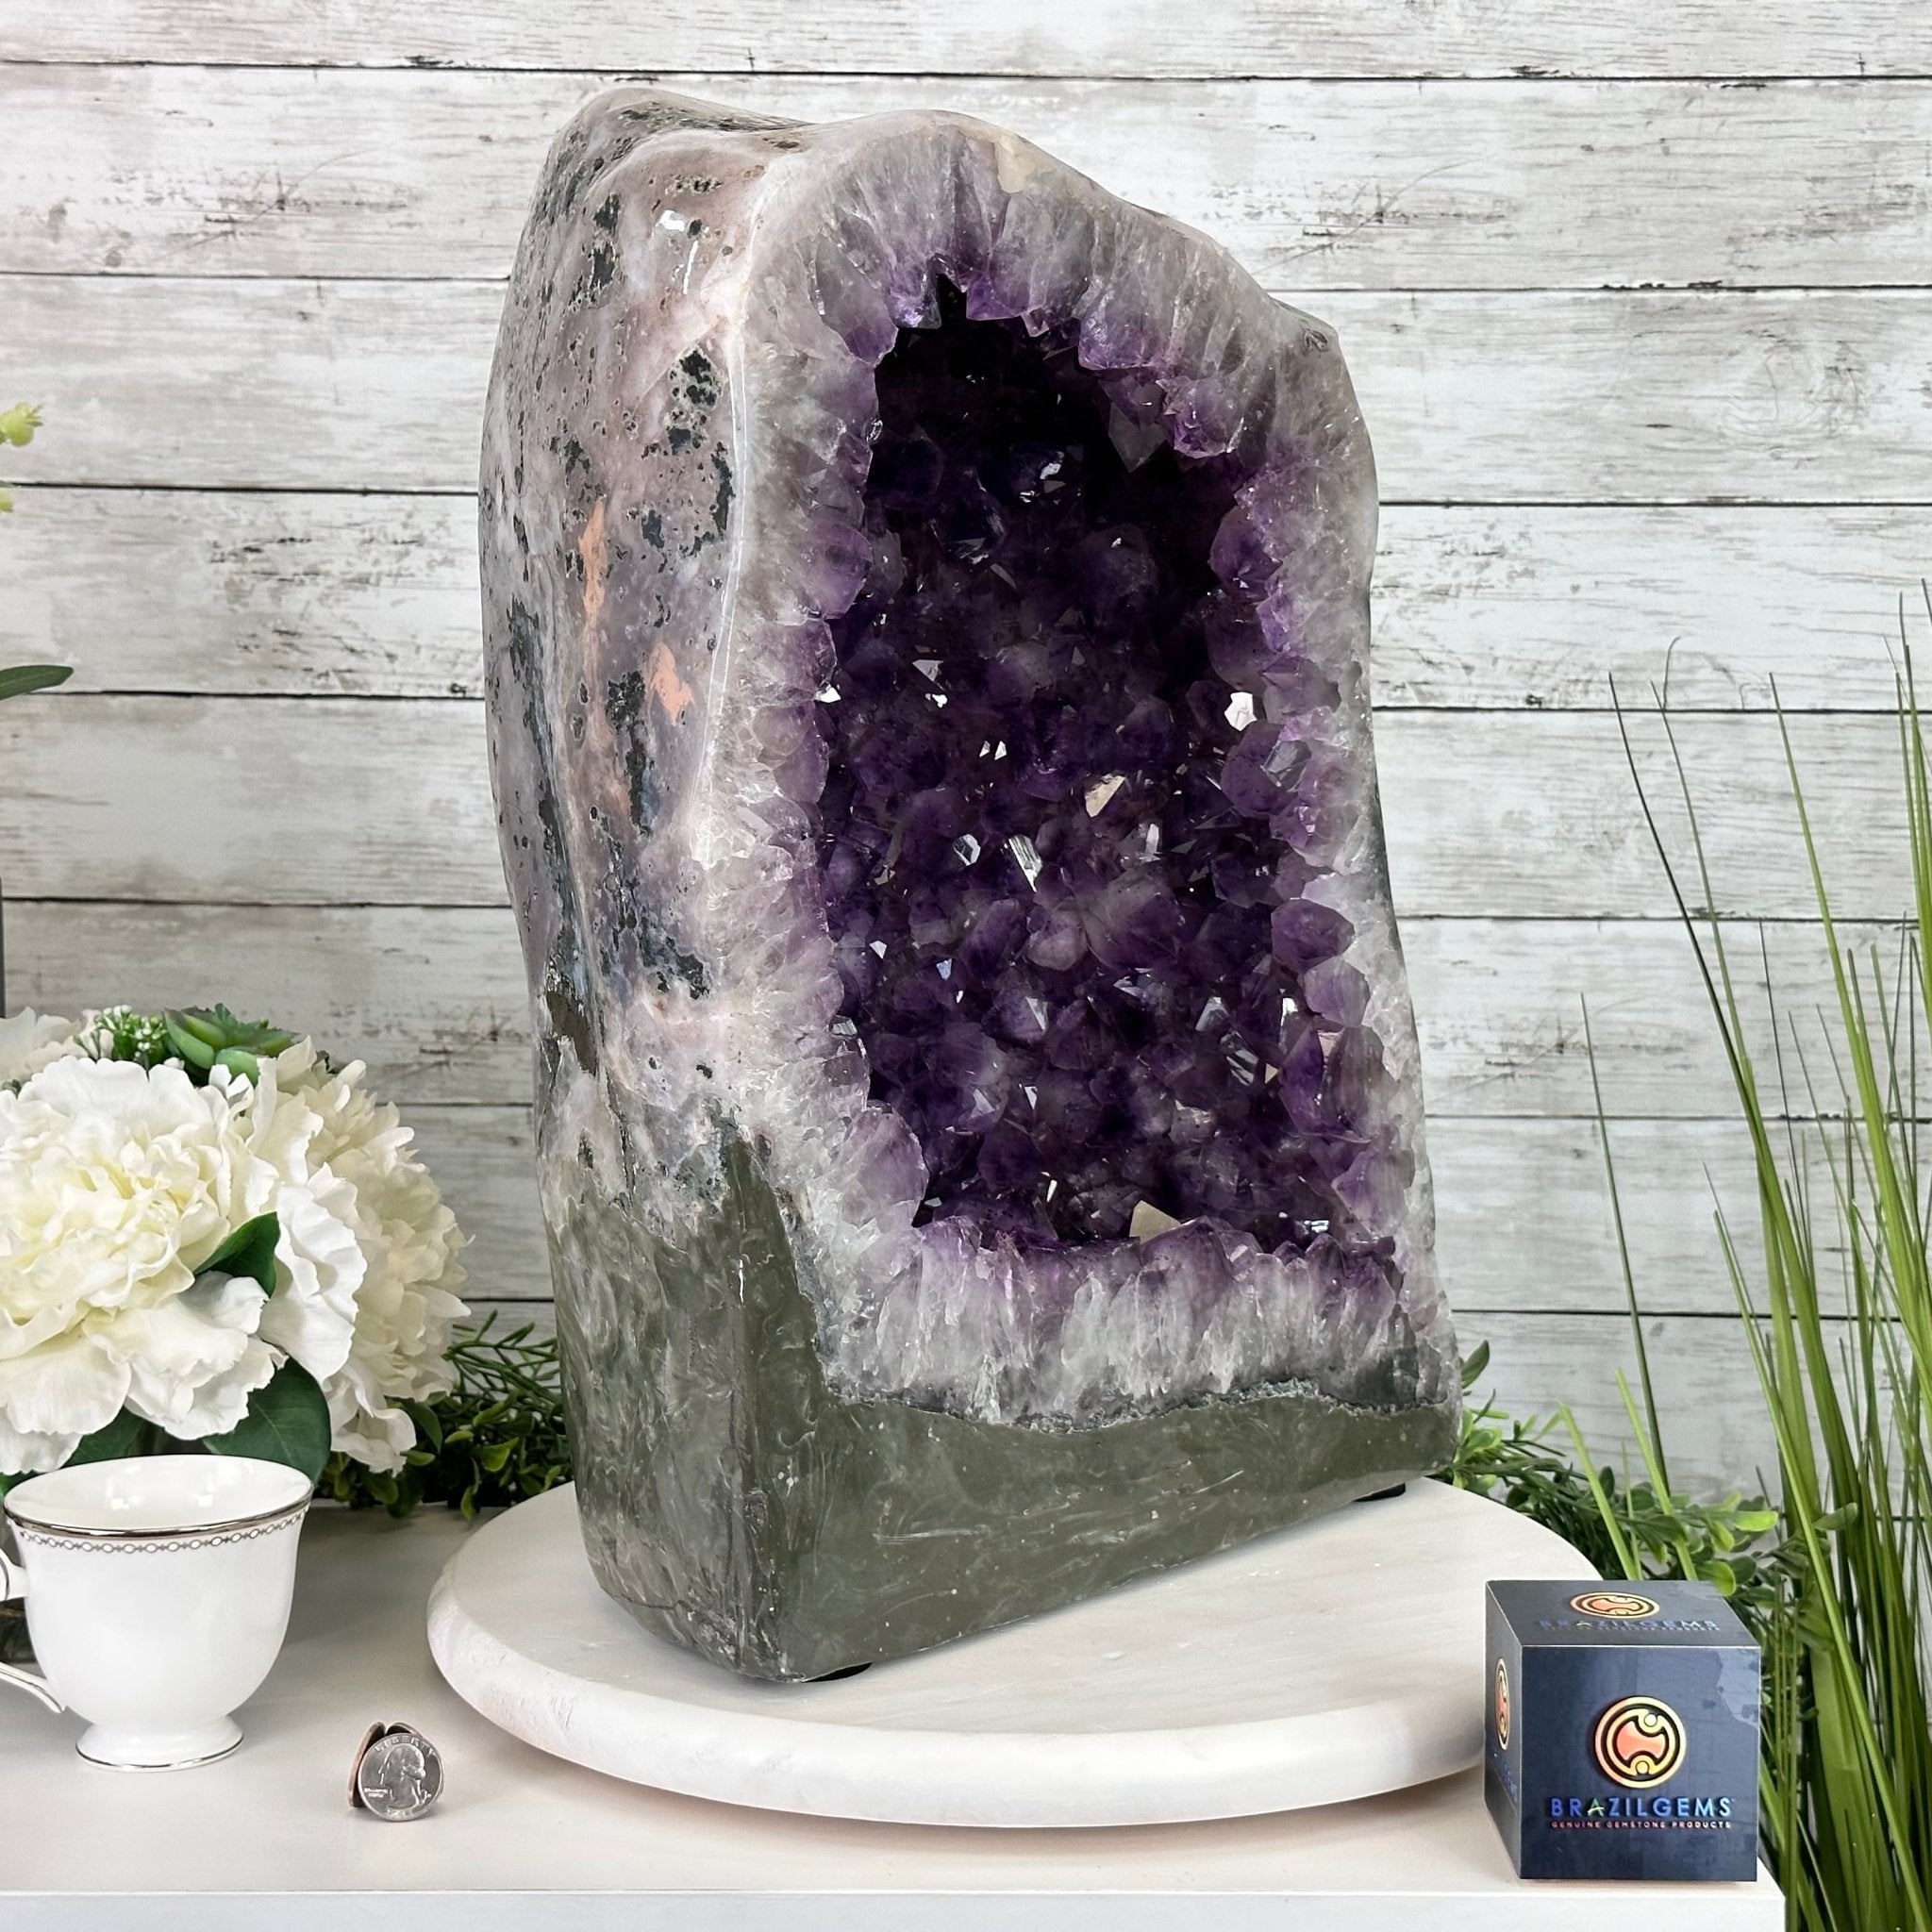 Extra Plus Quality Polished Brazilian Amethyst Cathedral, 78.9 lbs & 18.25" tall Model #5602-0179 by Brazil Gems - Brazil GemsBrazil GemsExtra Plus Quality Polished Brazilian Amethyst Cathedral, 78.9 lbs & 18.25" tall Model #5602-0179 by Brazil GemsPolished Cathedrals5602-0179